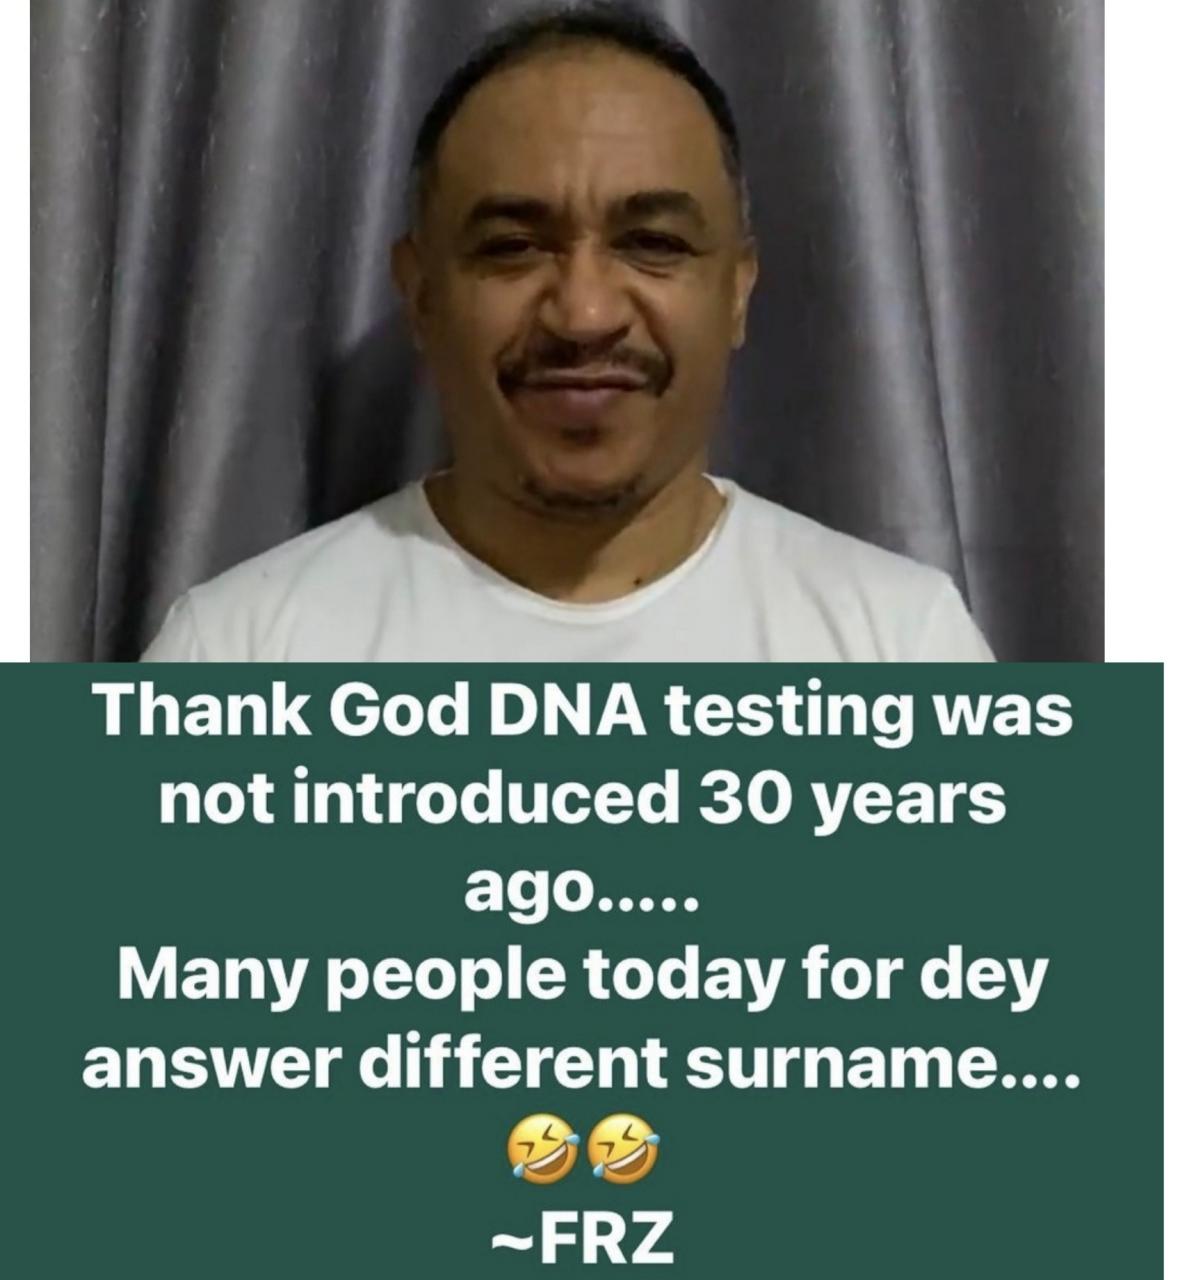 Thank God DNA testing was not introduced 30 years ago, many people today for dey answer different surname - Daddy Freeze